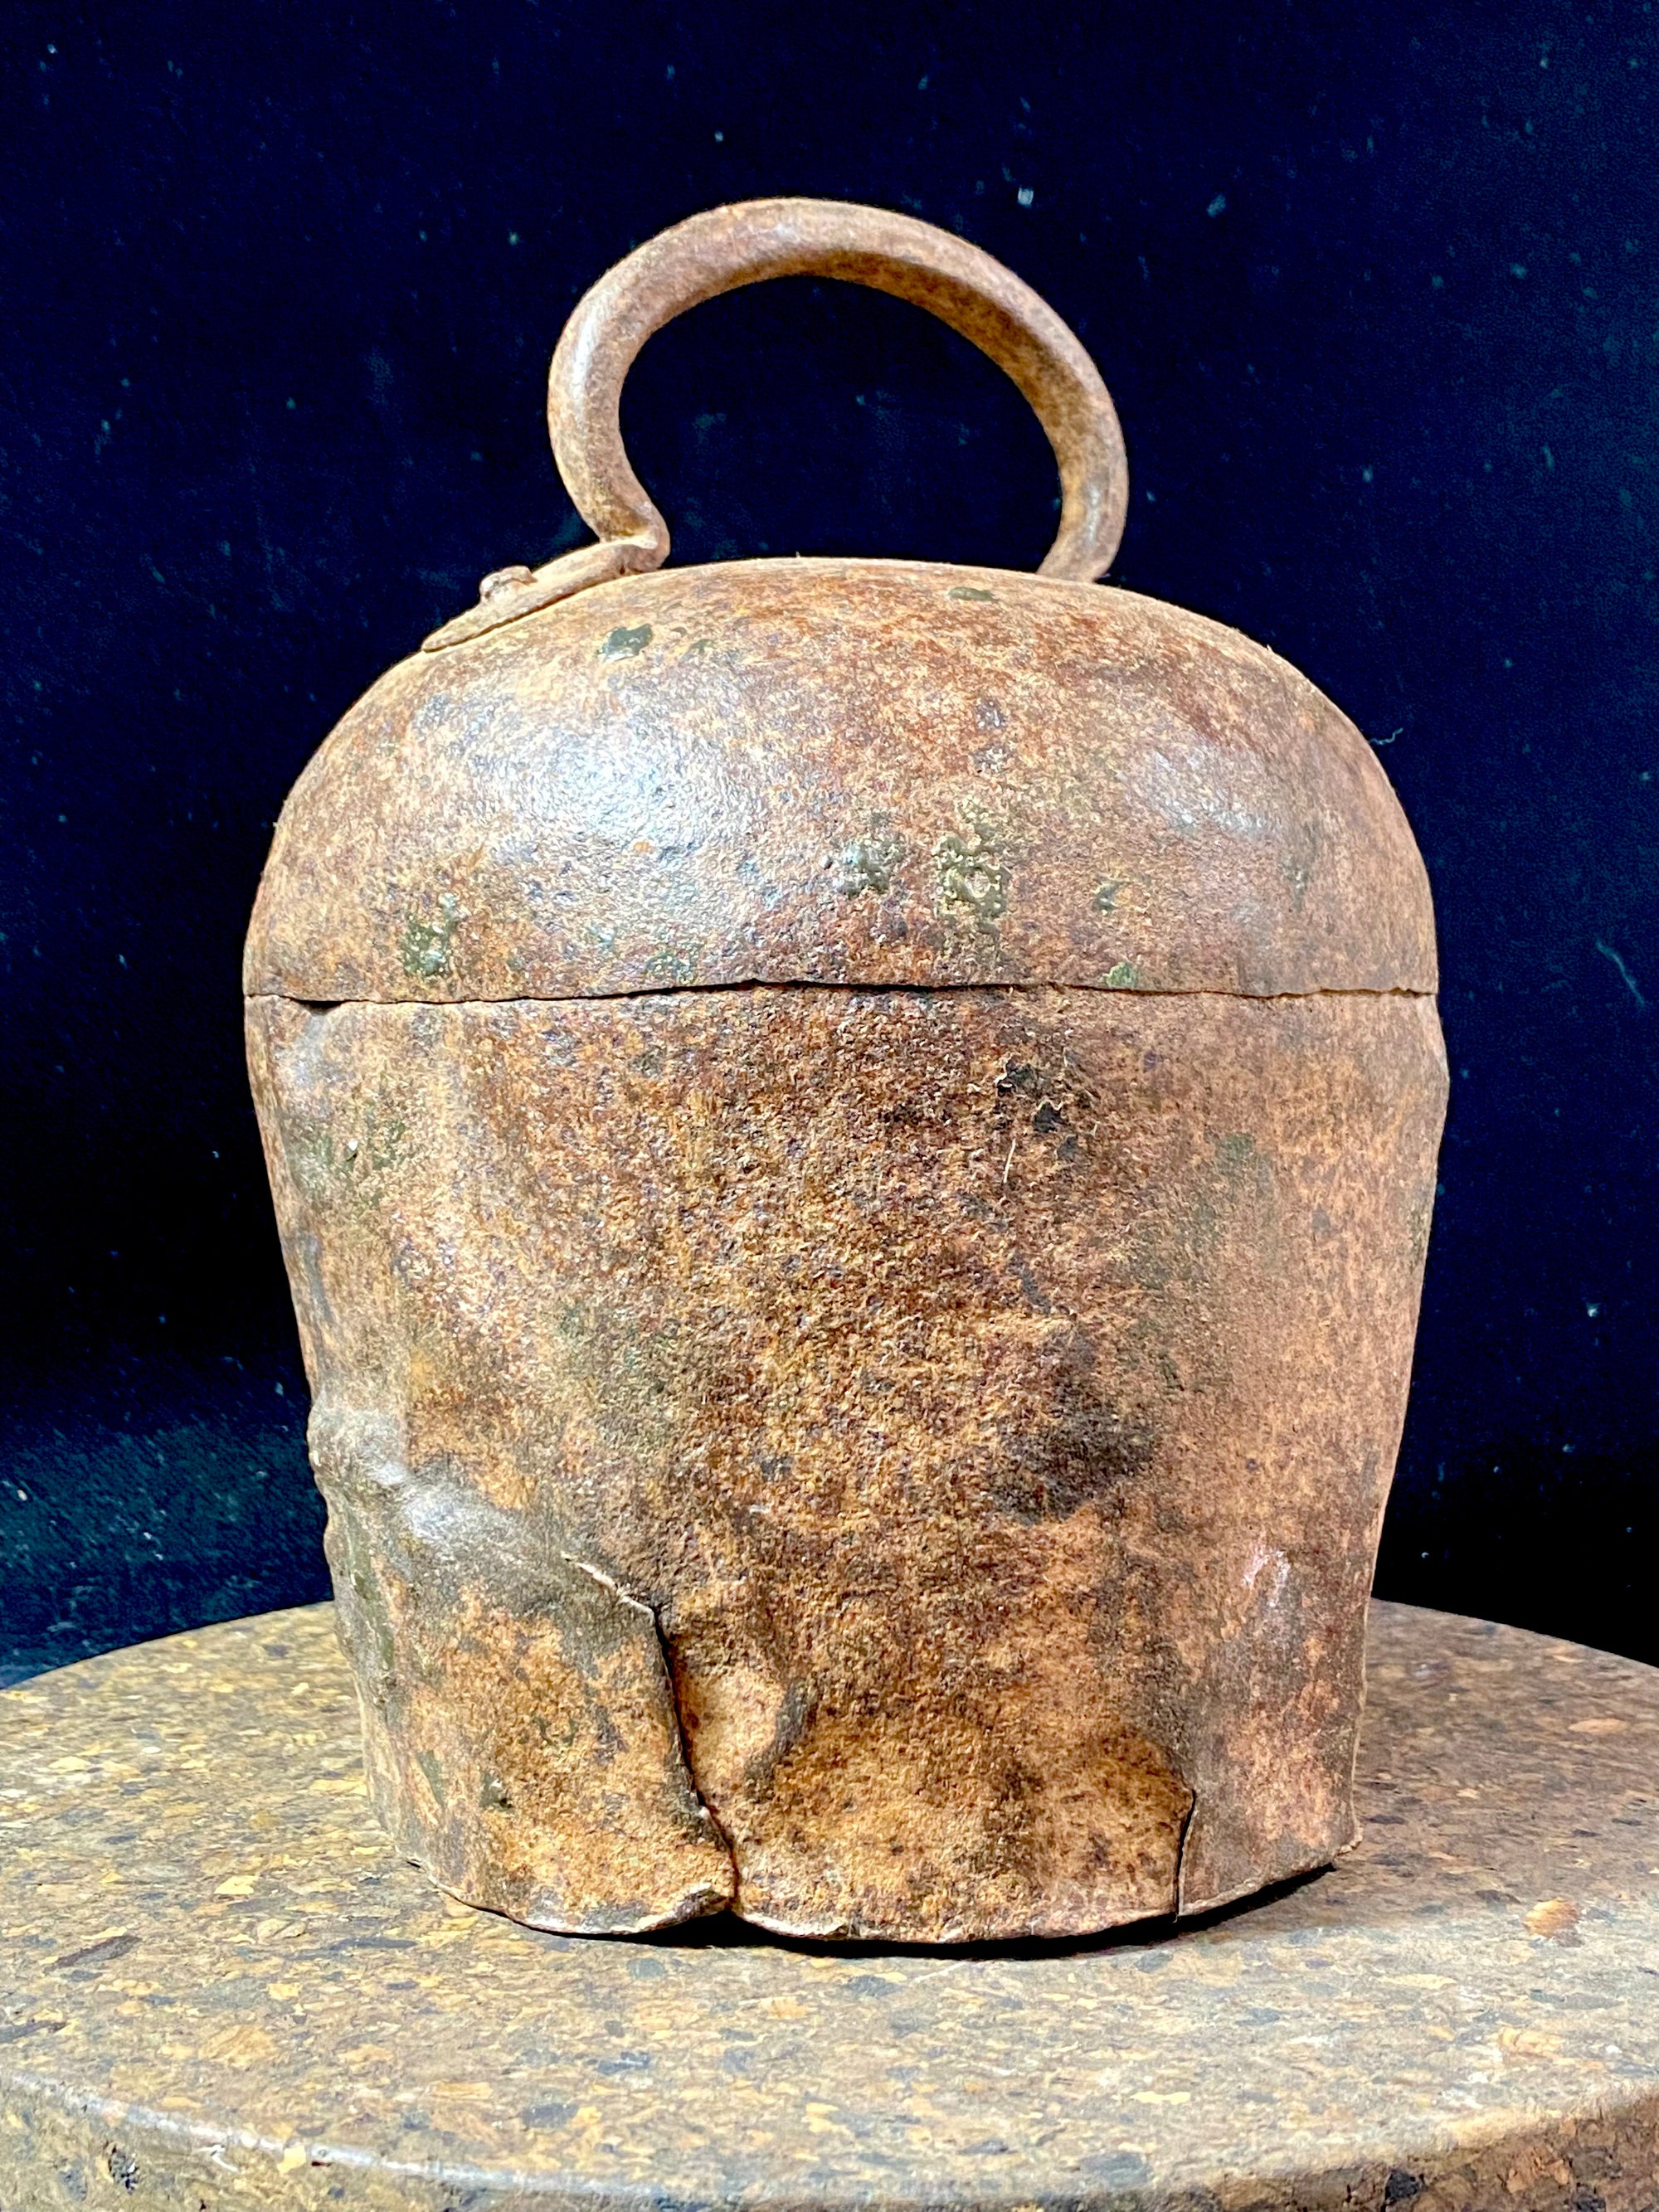 Antique camel or elephant bell, very large, one of the largest we've ever seen. This genuine old piece dates to the early 20th century and has a deep, melodic tone when rung. From Rajasthan, north India. Iron Measurements: Diameter at widest point 16 cm, height including handle 22 cm